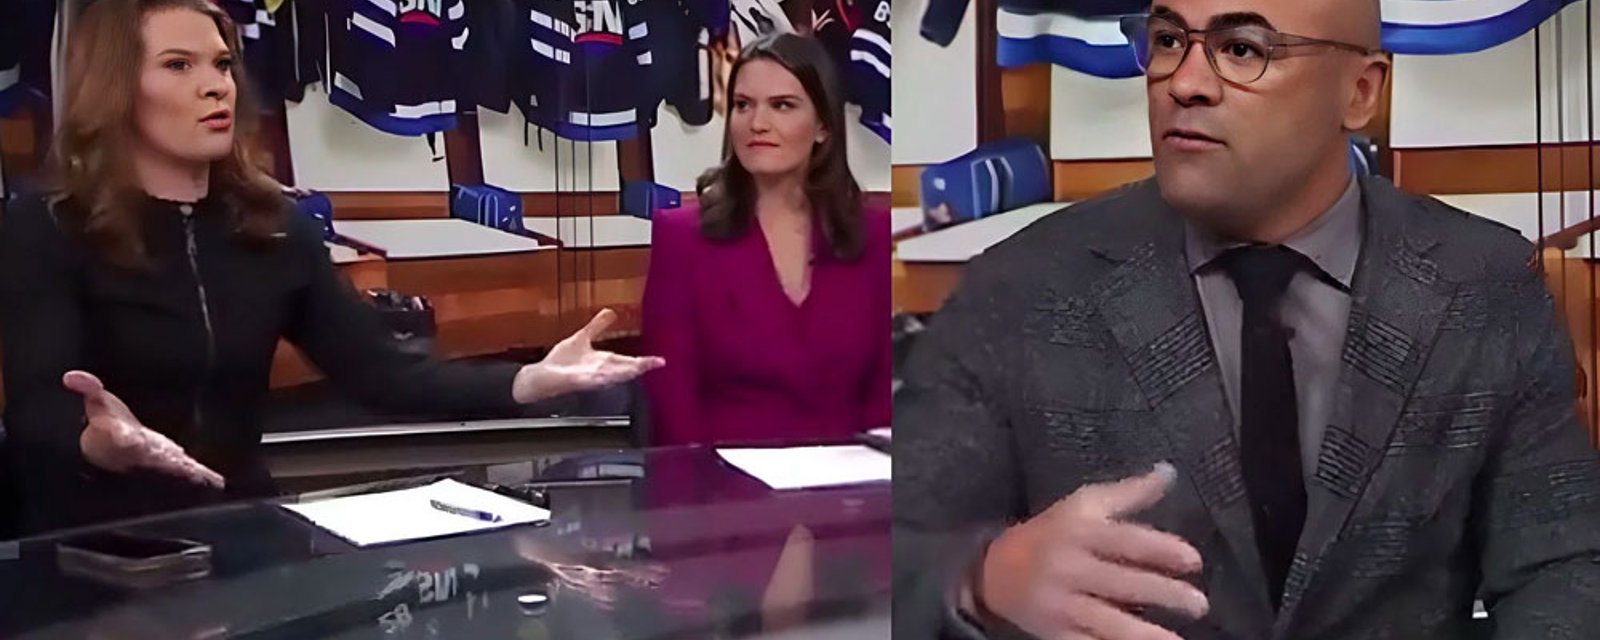 Sportnet's top female analyst gets put in her place by former NHLer